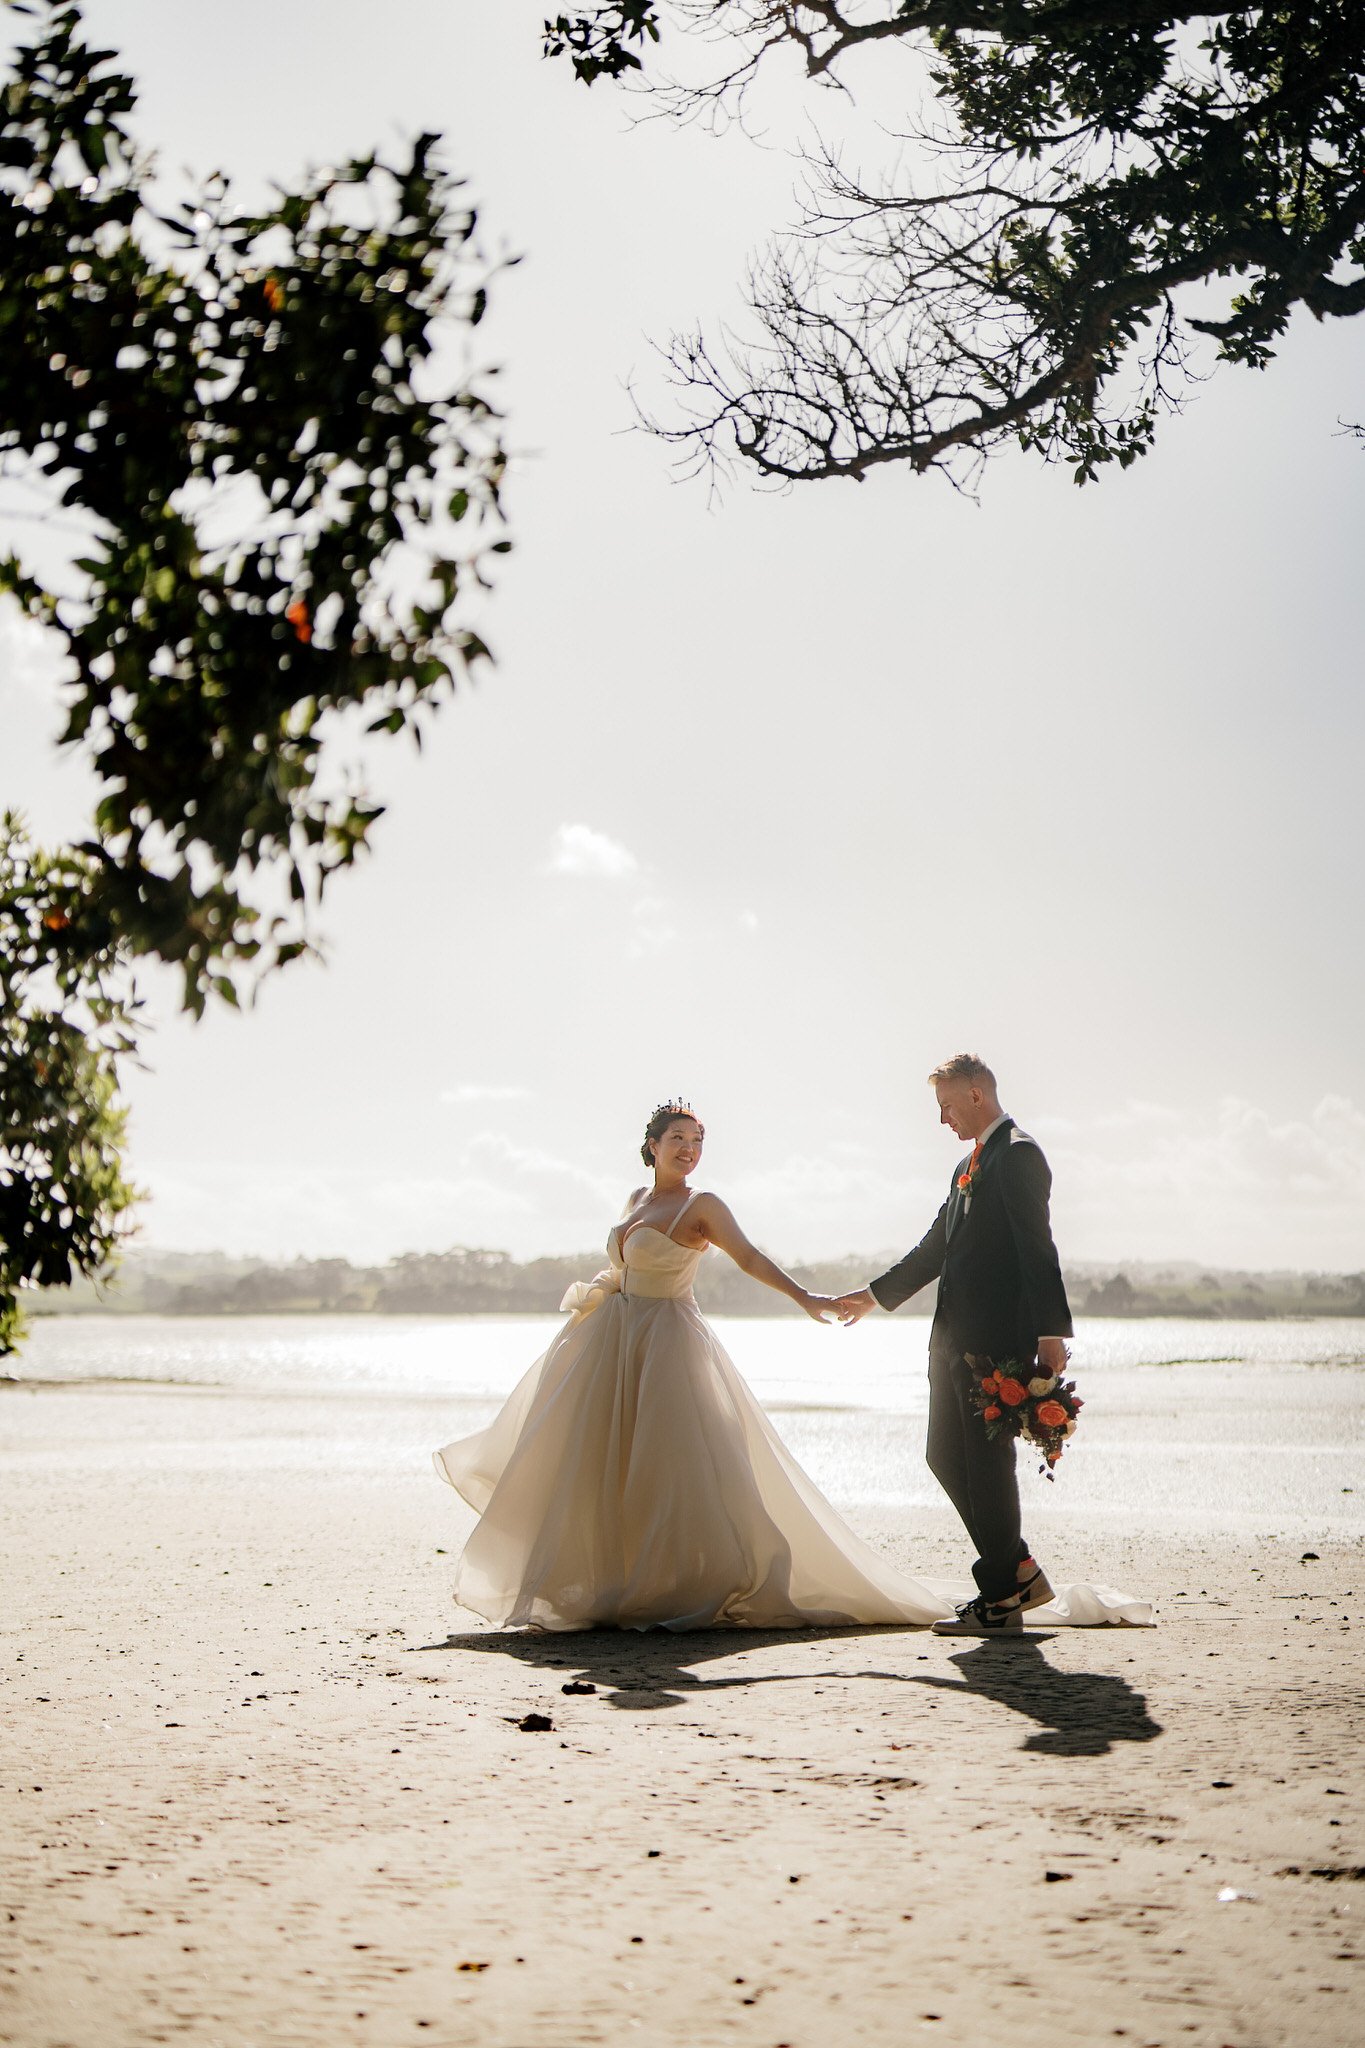 huntly-house-auckland-wedding-venue-mansion-vintage-luxury-accommodation-photographer-videography-dear-white-productions-photo-film-south-clarks-beach (105).jpg